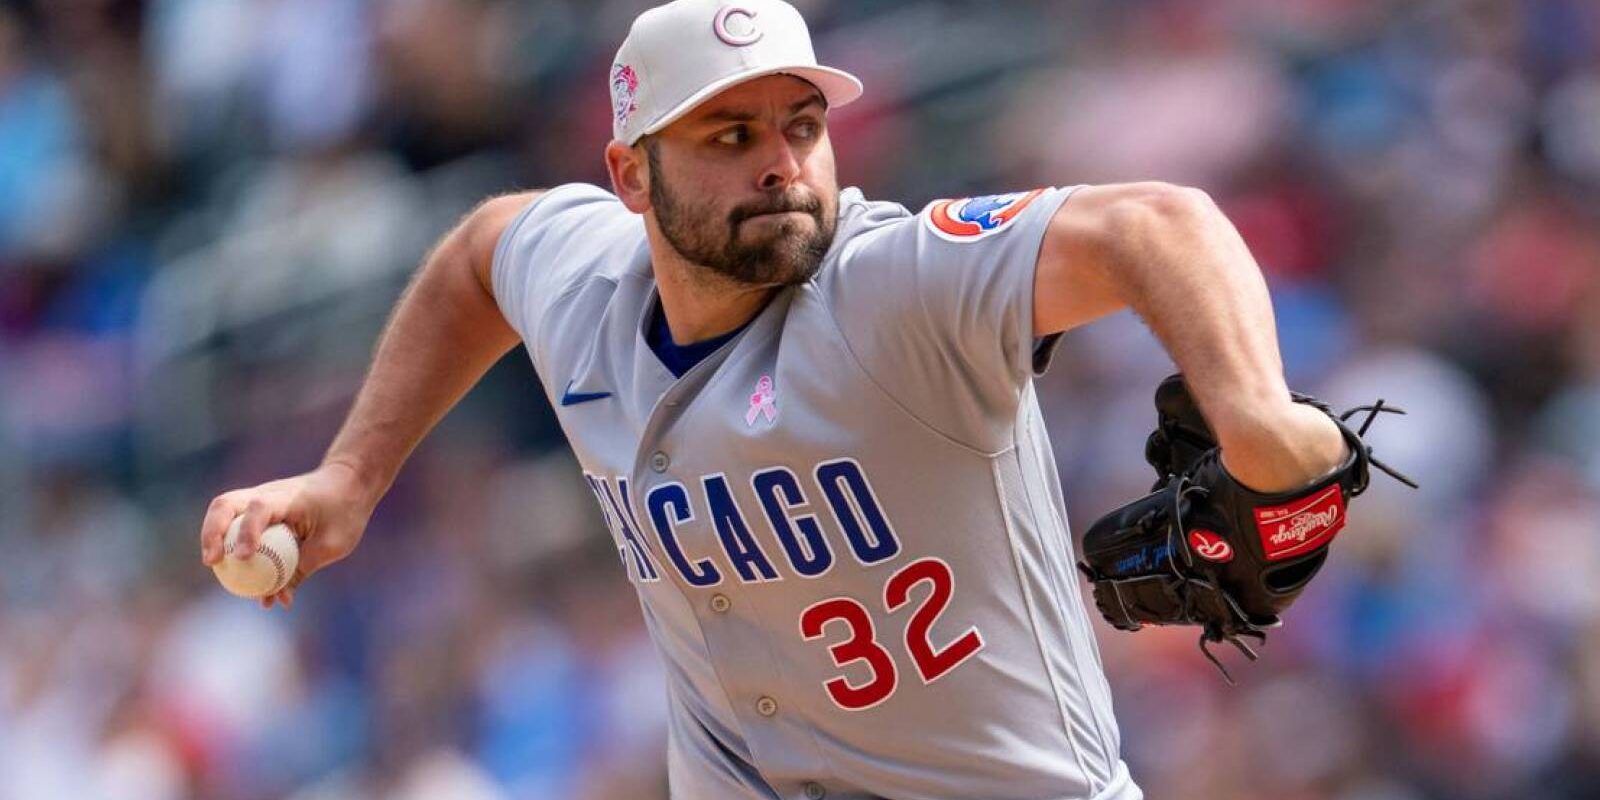 May 14, 2023; Minneapolis, Minnesota, USA; Chicago Cubs relief pitcher Michael Fulmer (32) pitches in the eighth inning against the Minnesota Twins at Target Field. Mandatory Credit: Matt Blewett-USA TODAY Sports